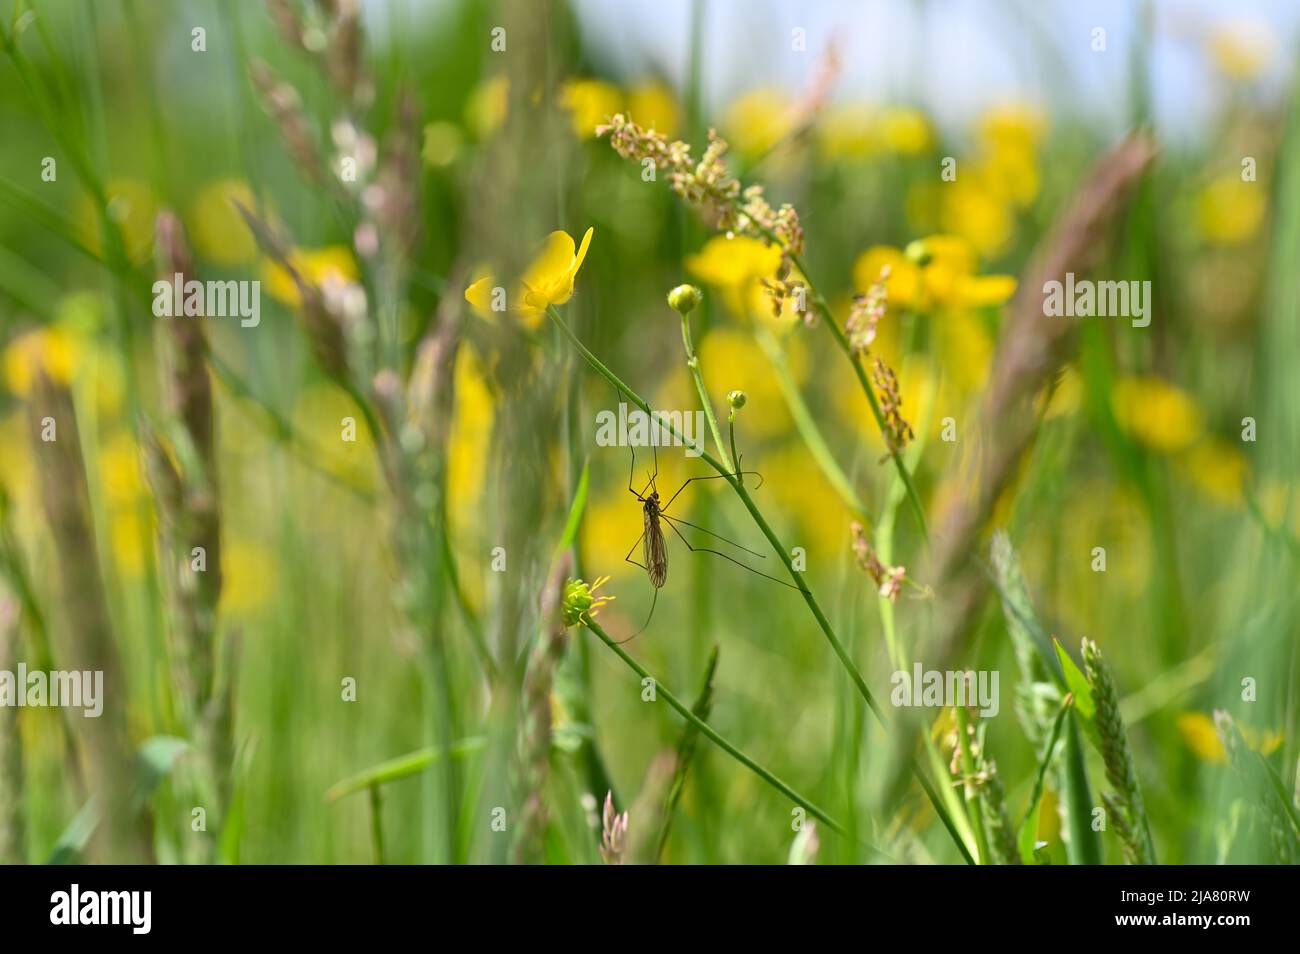 Meadow Crane - Large gnat on a buttercup in a green meadow Stock Photo